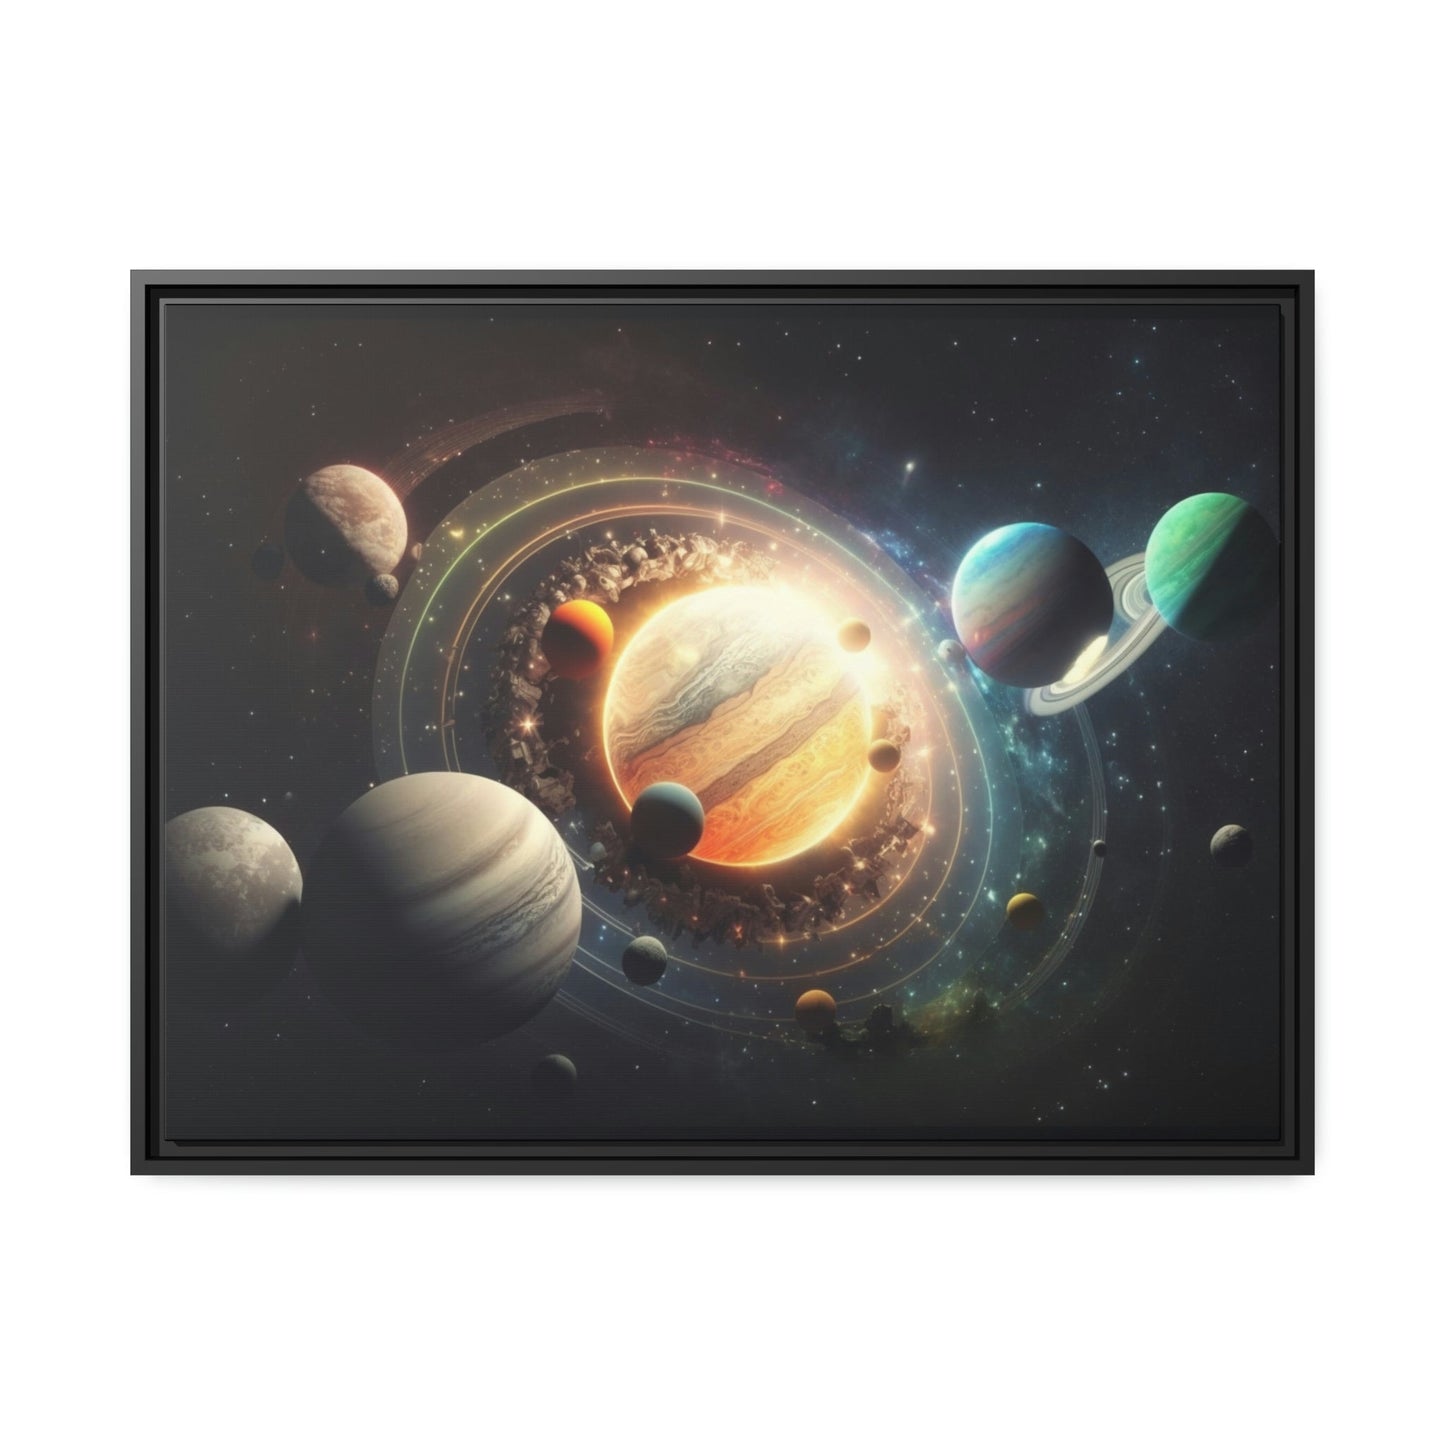 Starry Nights: Framed Canvas Art of the Solar System to Inspire Your Inner Astronomer